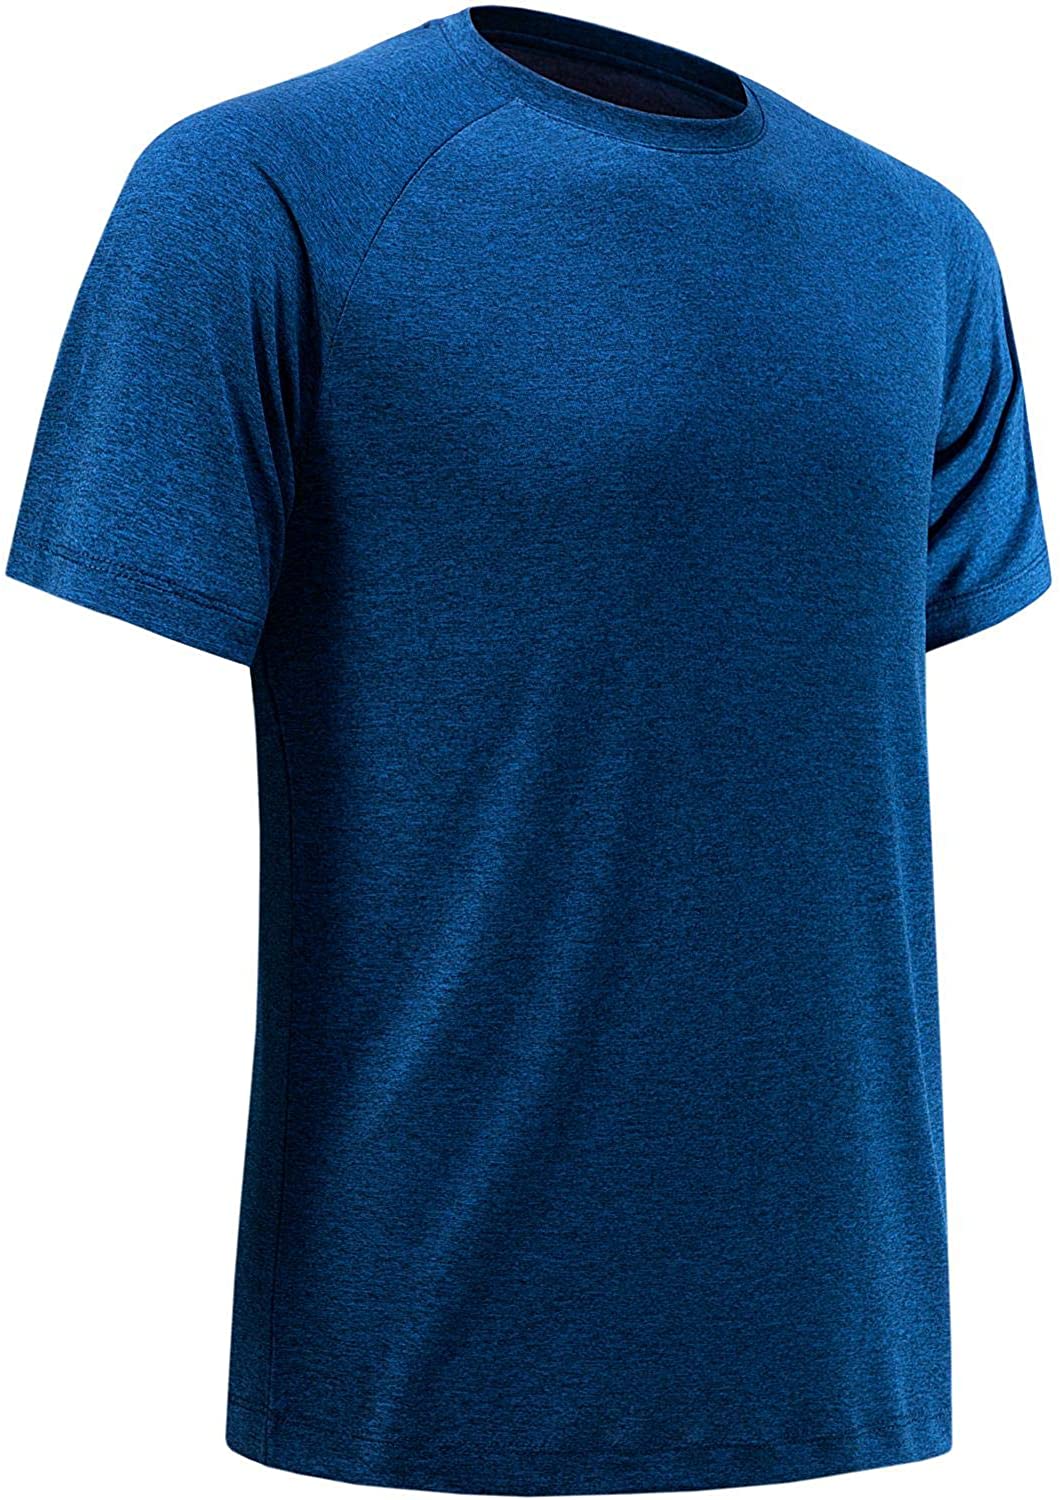 Men's Athletic Tees Exercise Fitness Shirts